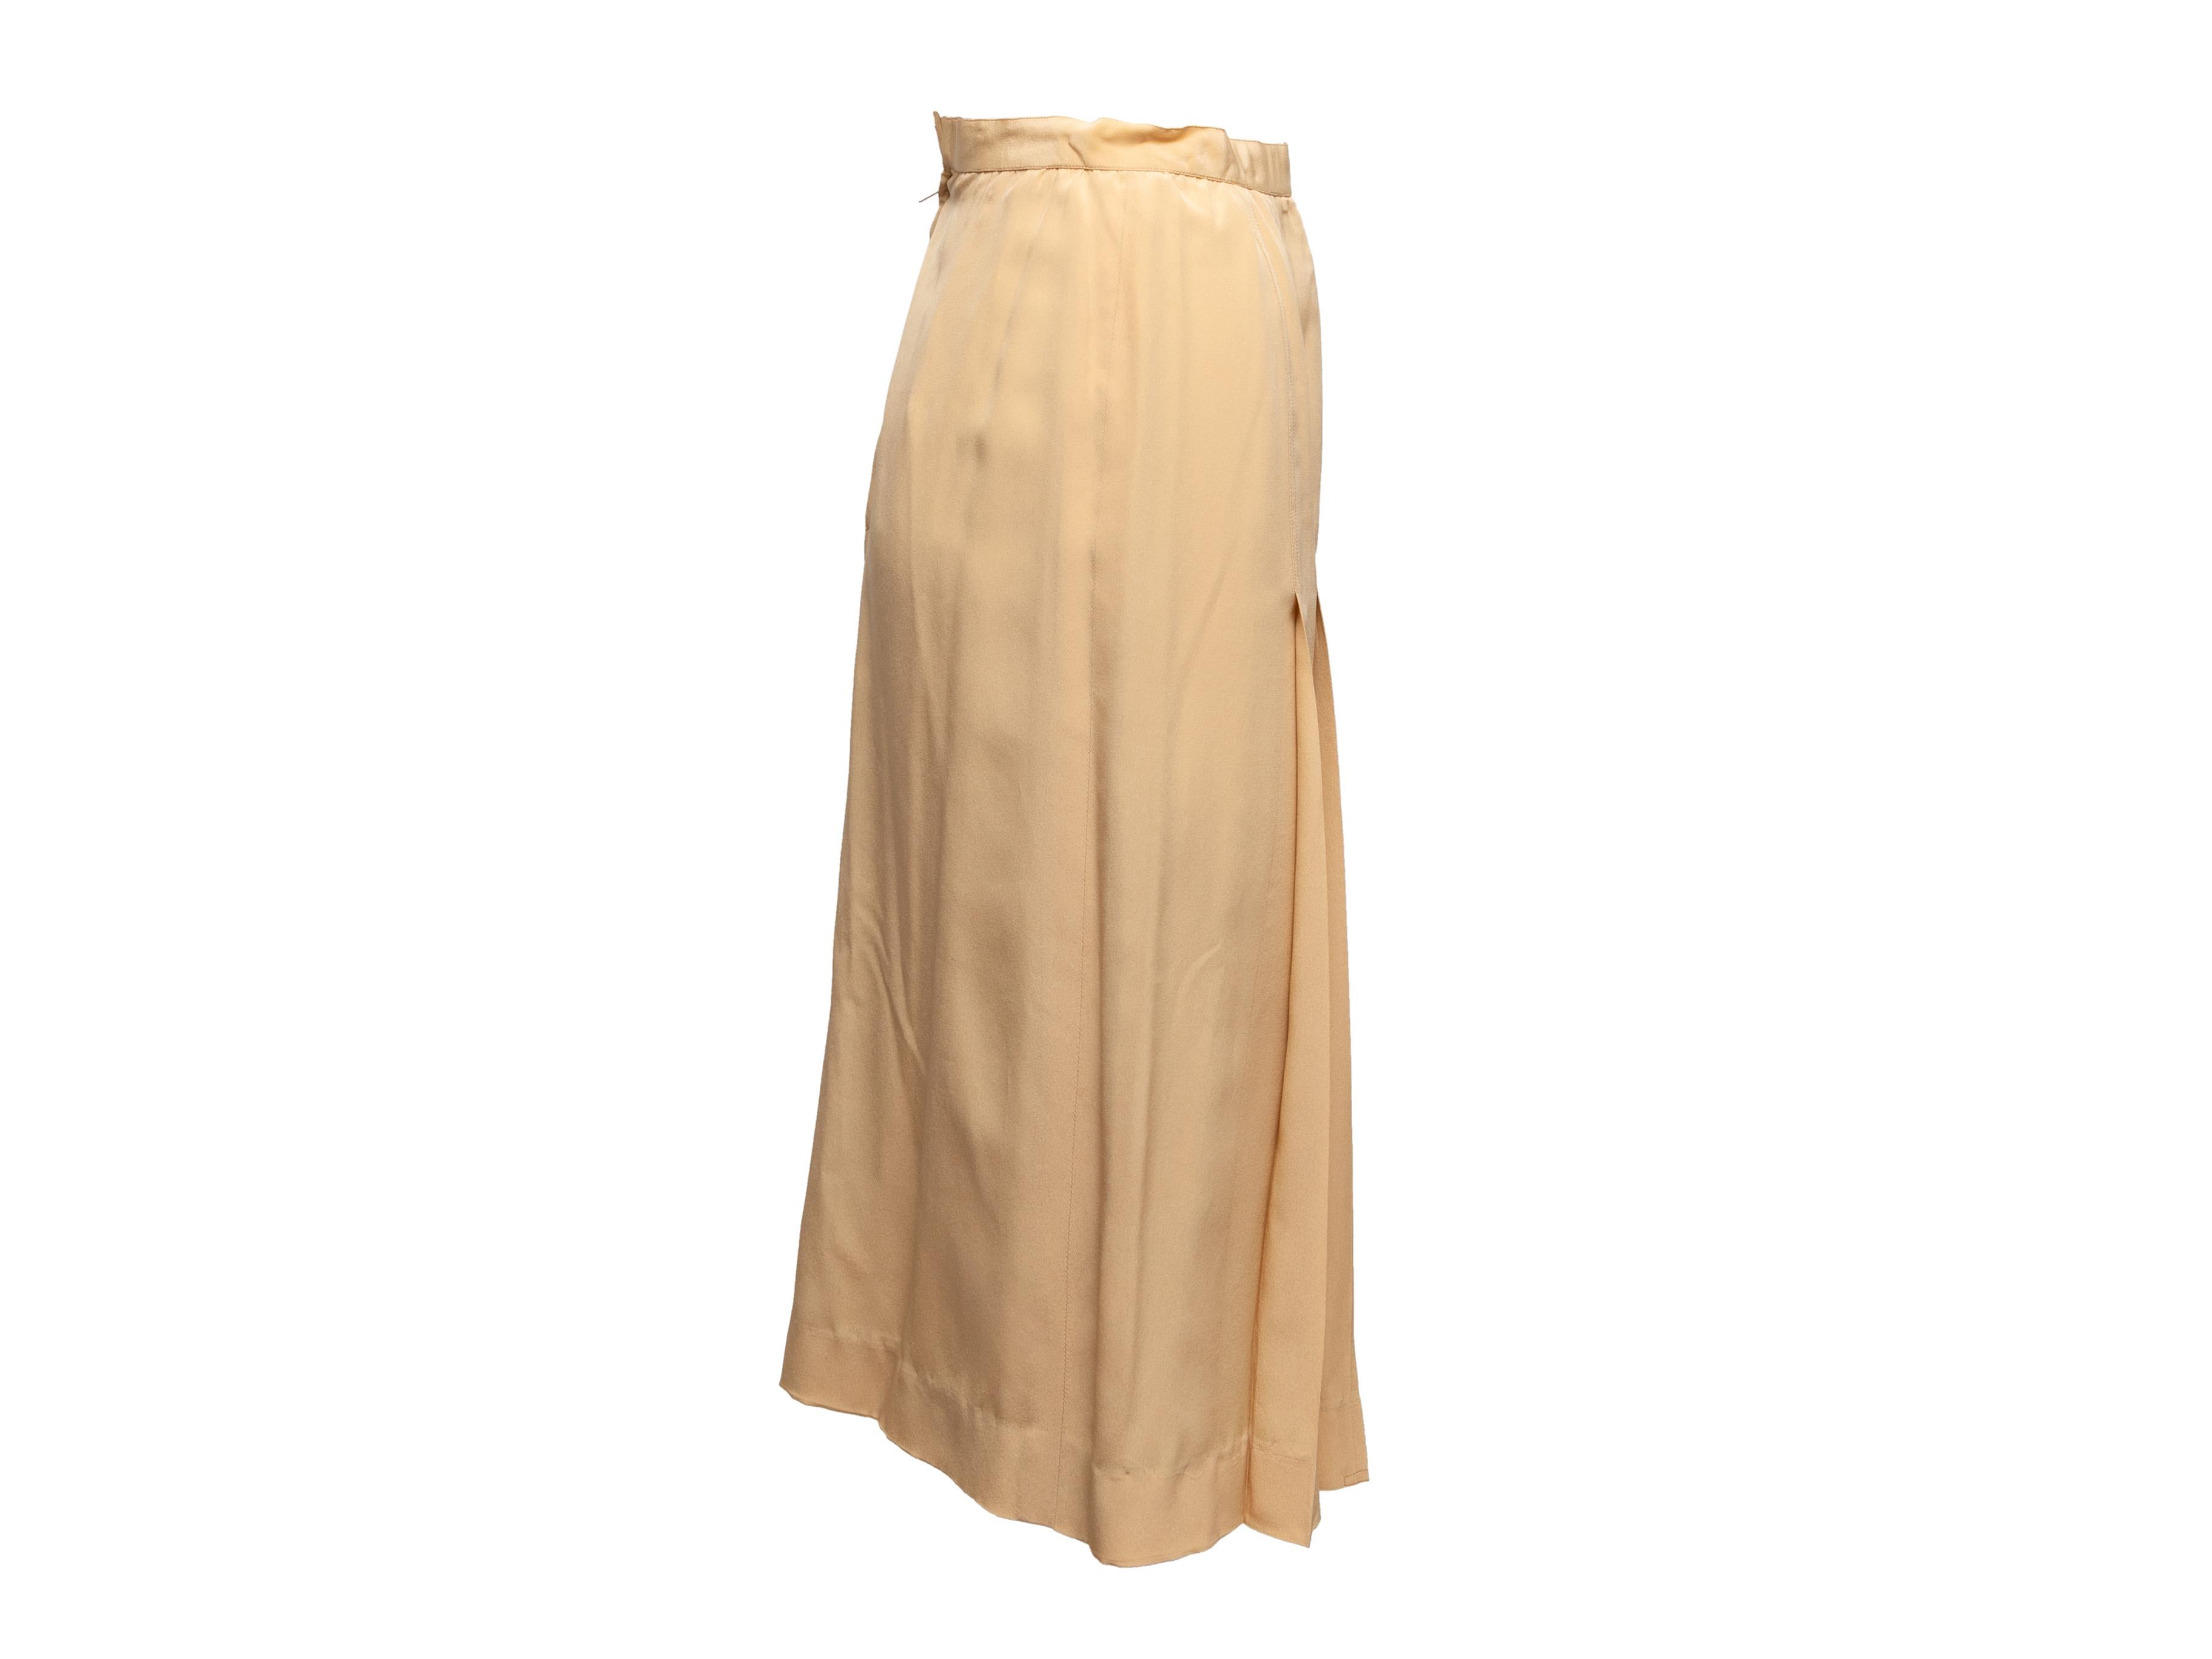 Vintage Beige Chanel Silk Midi Skirt Size FR 38 In Good Condition For Sale In New York, NY